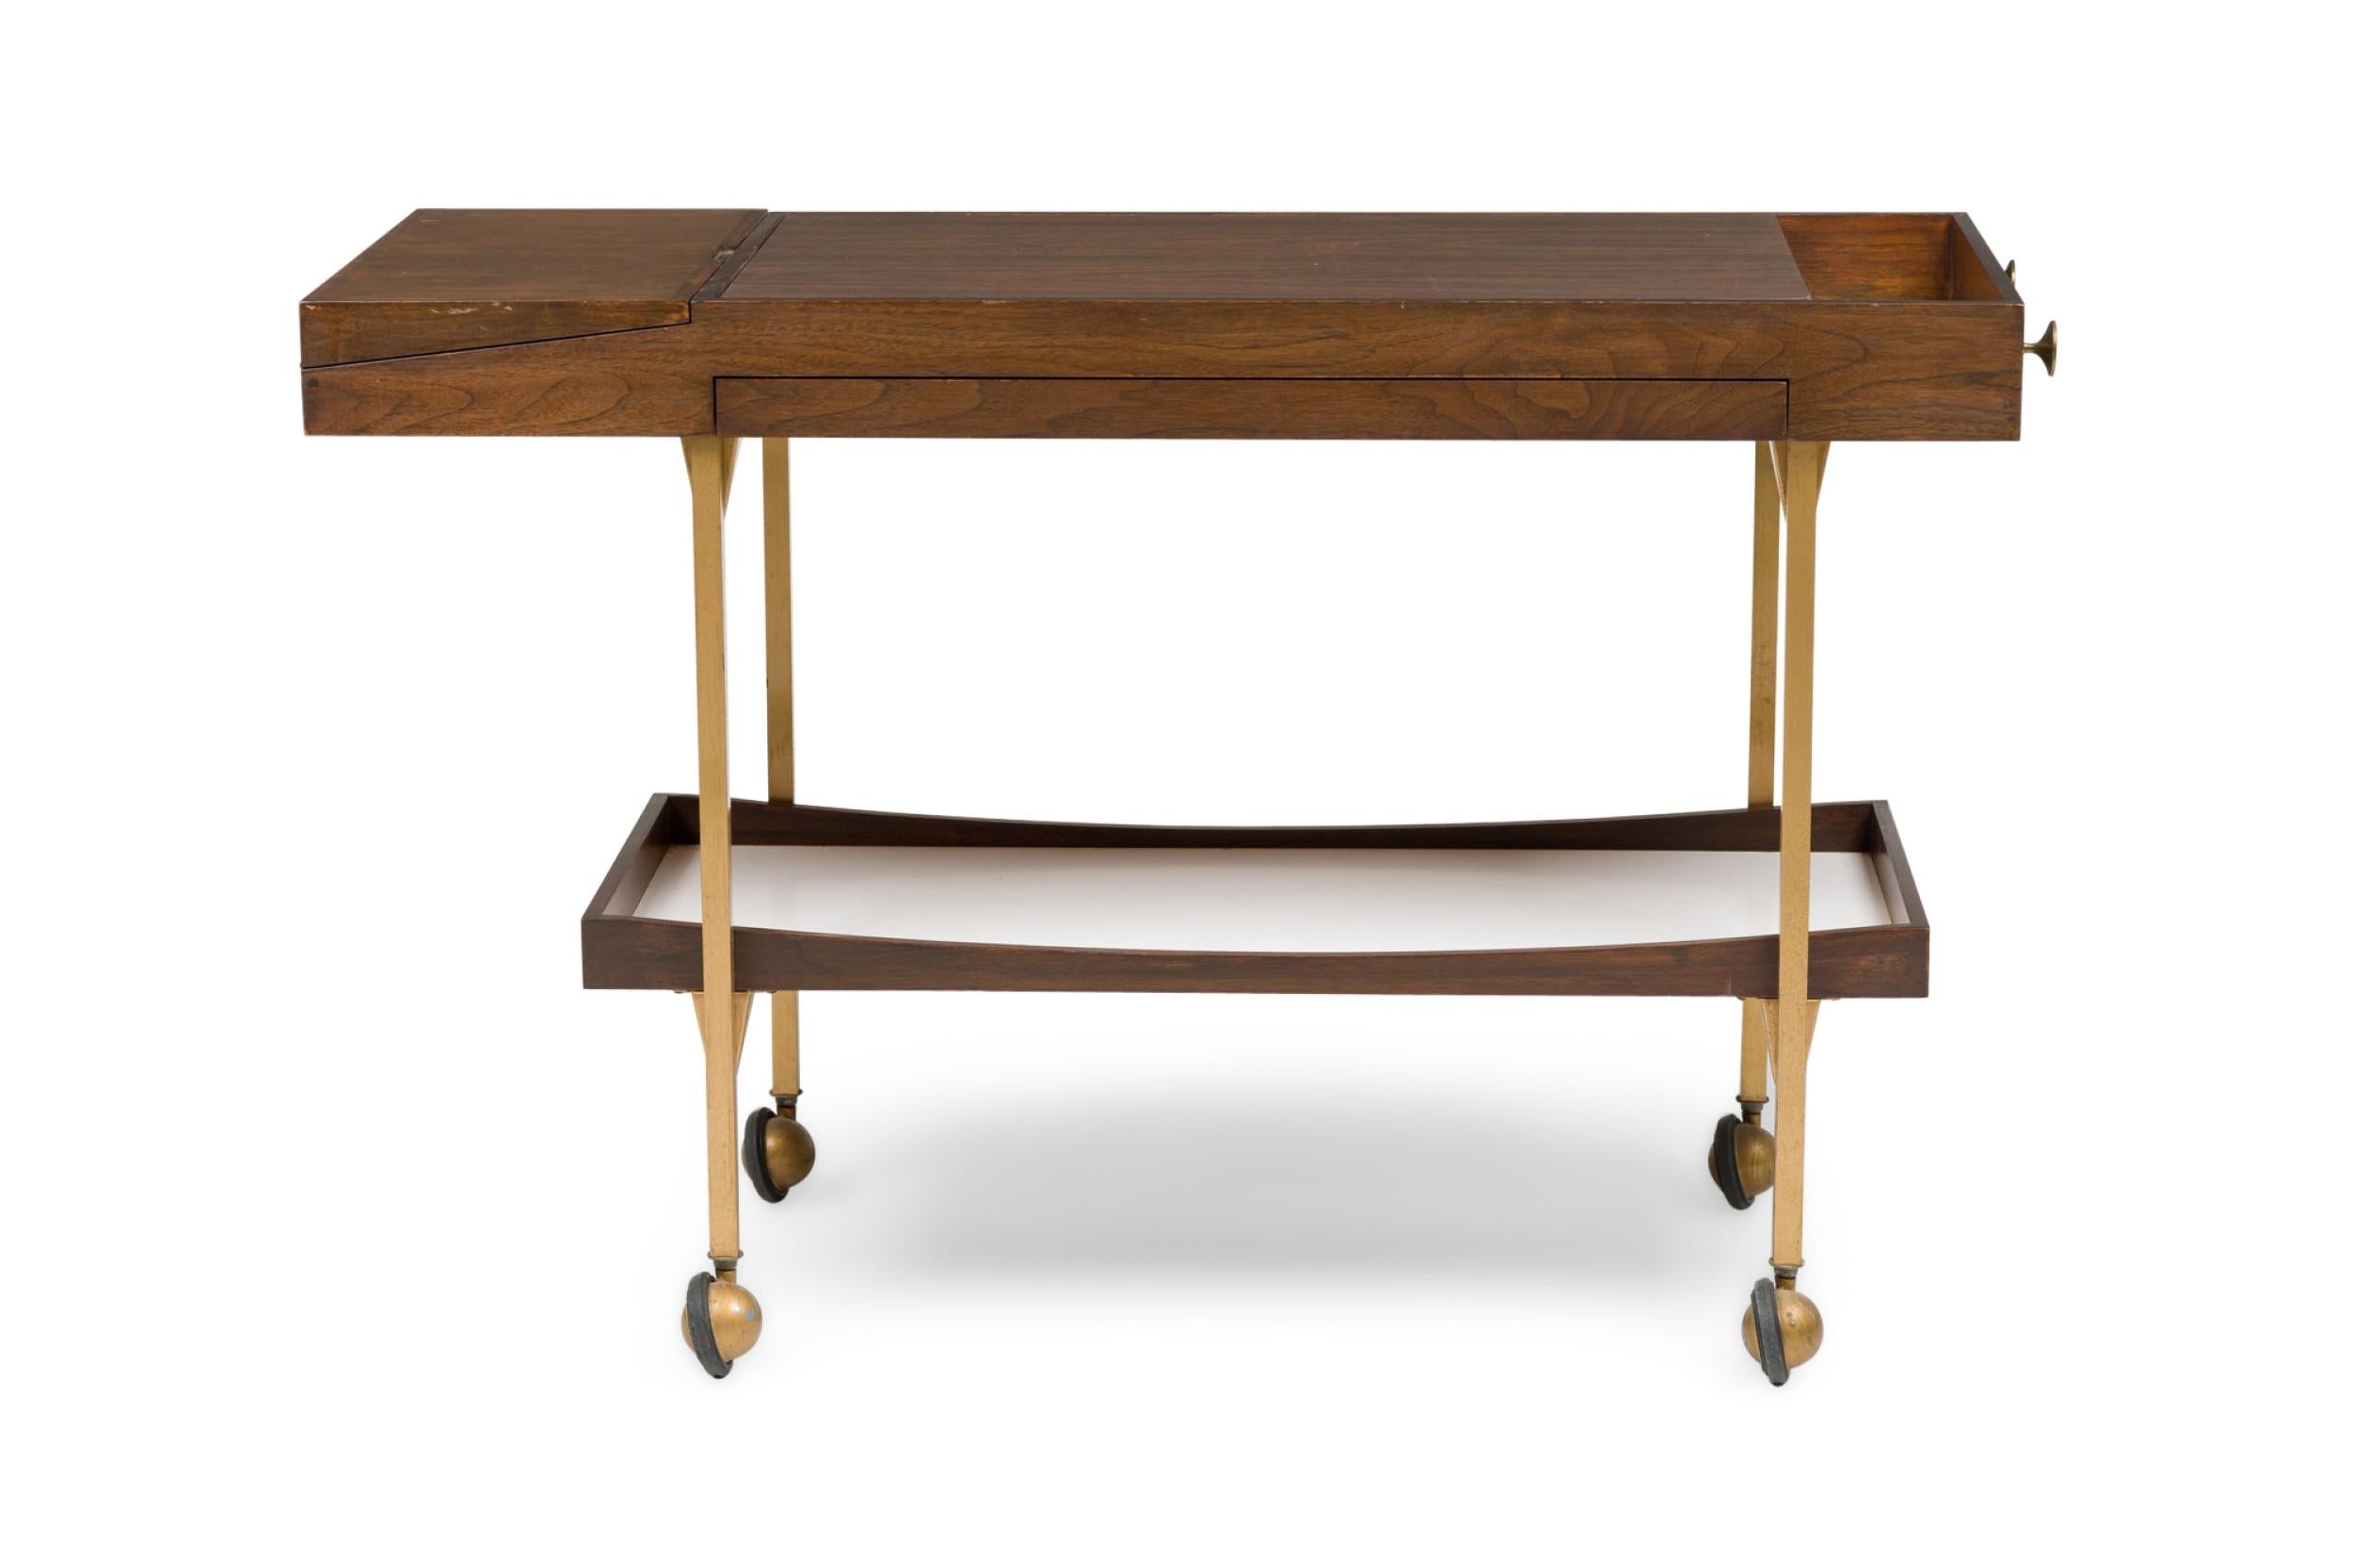 American Mid-Century wood bar cart featuring a lower shelf and a top having a hinged fold out small draw and a pull out top shelf supported on 4 round brass legs (Milo Baughman)